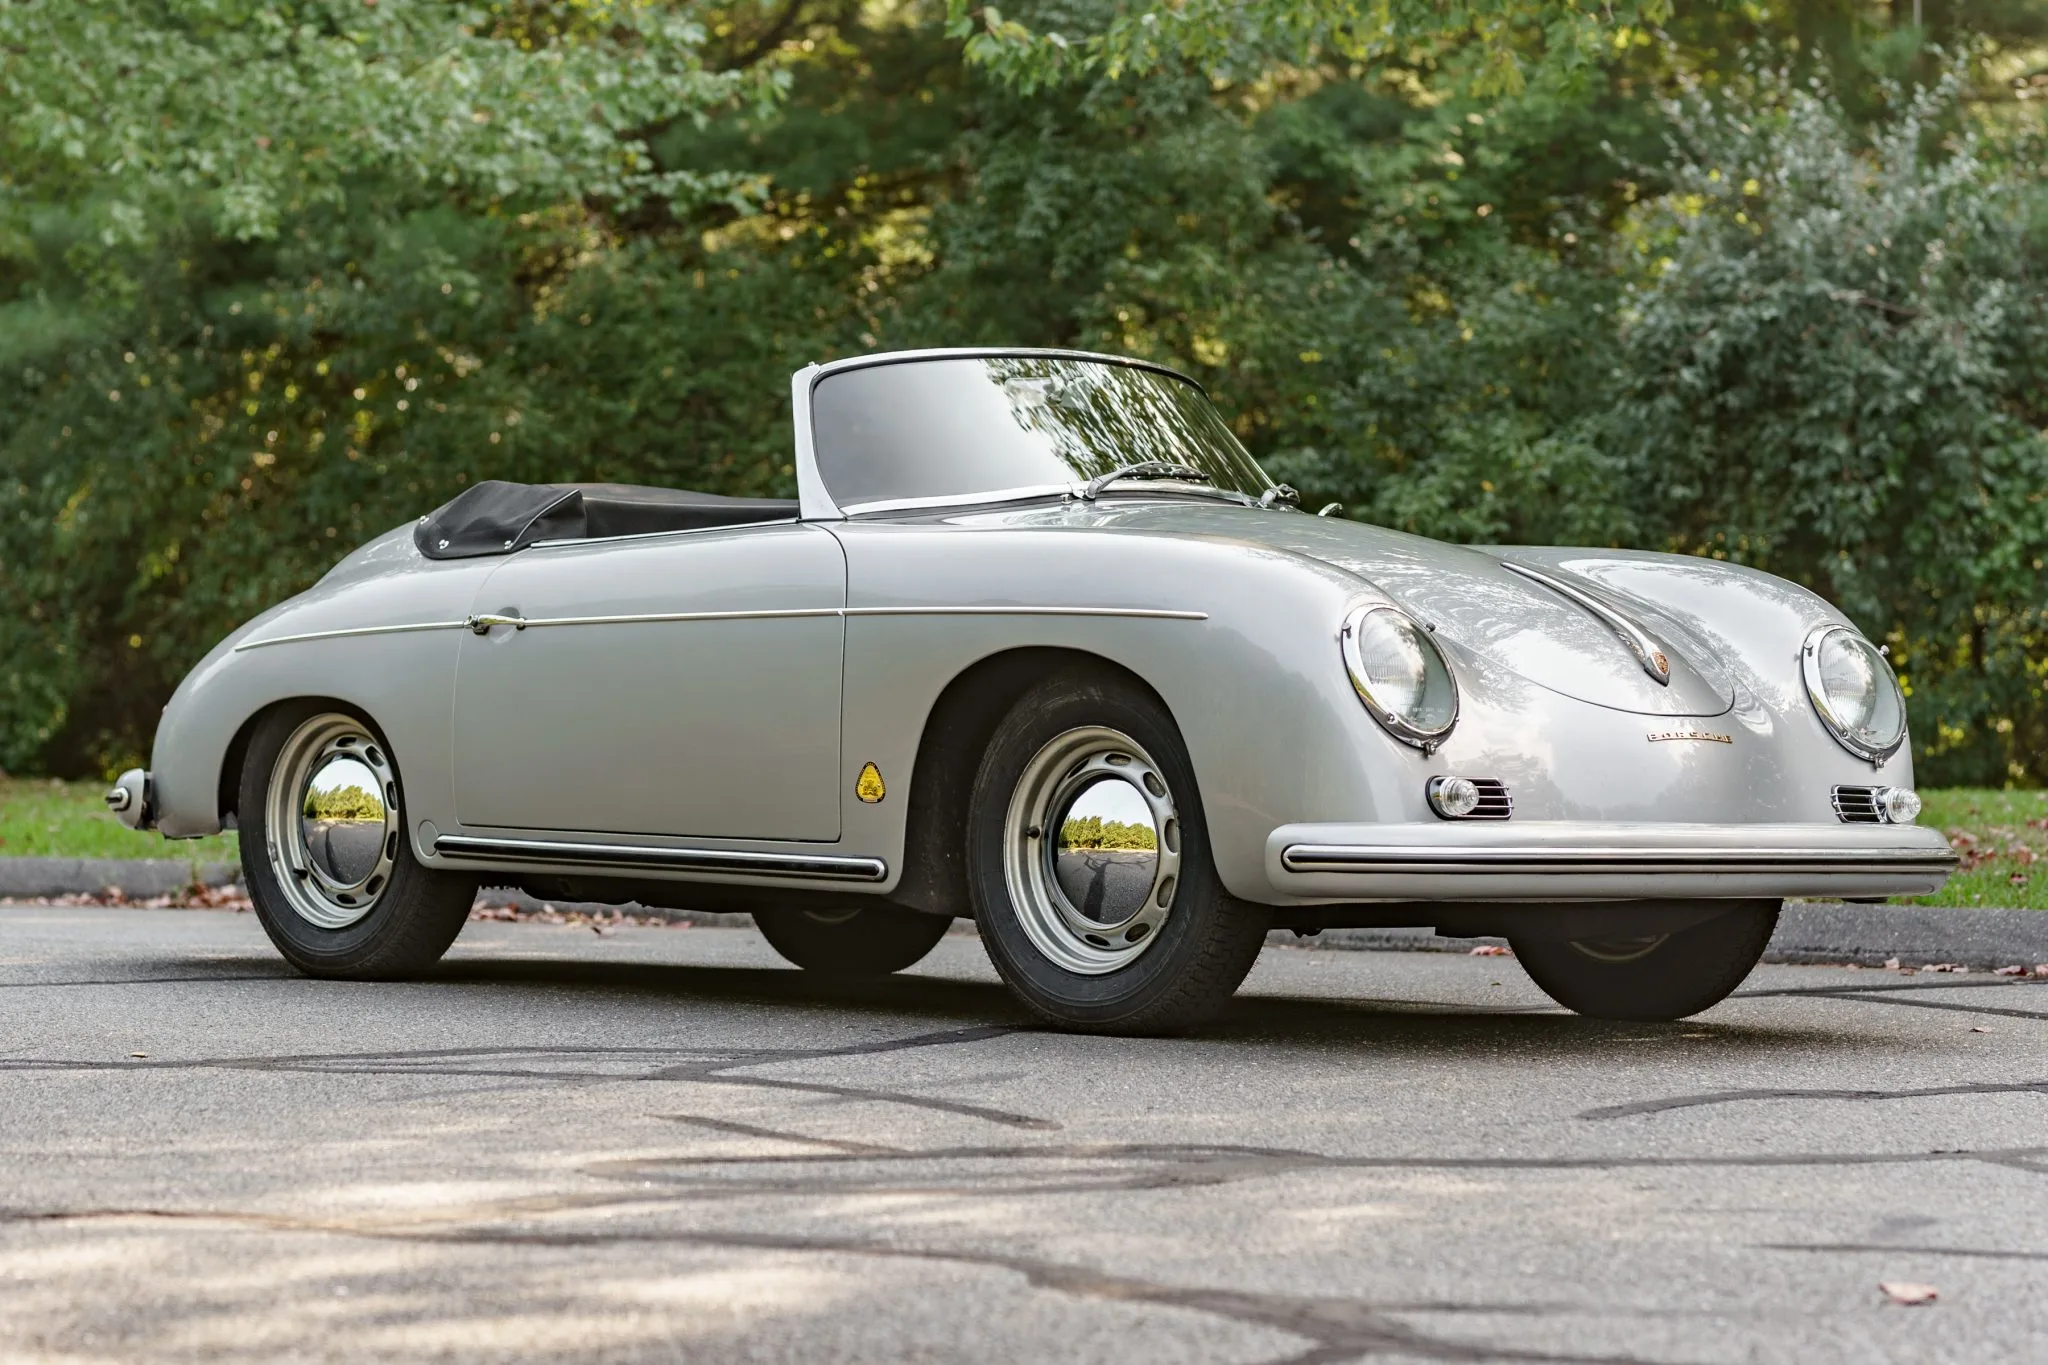 Well-Maintained 1958 Porsche 356A Convertible D Up For Sale!